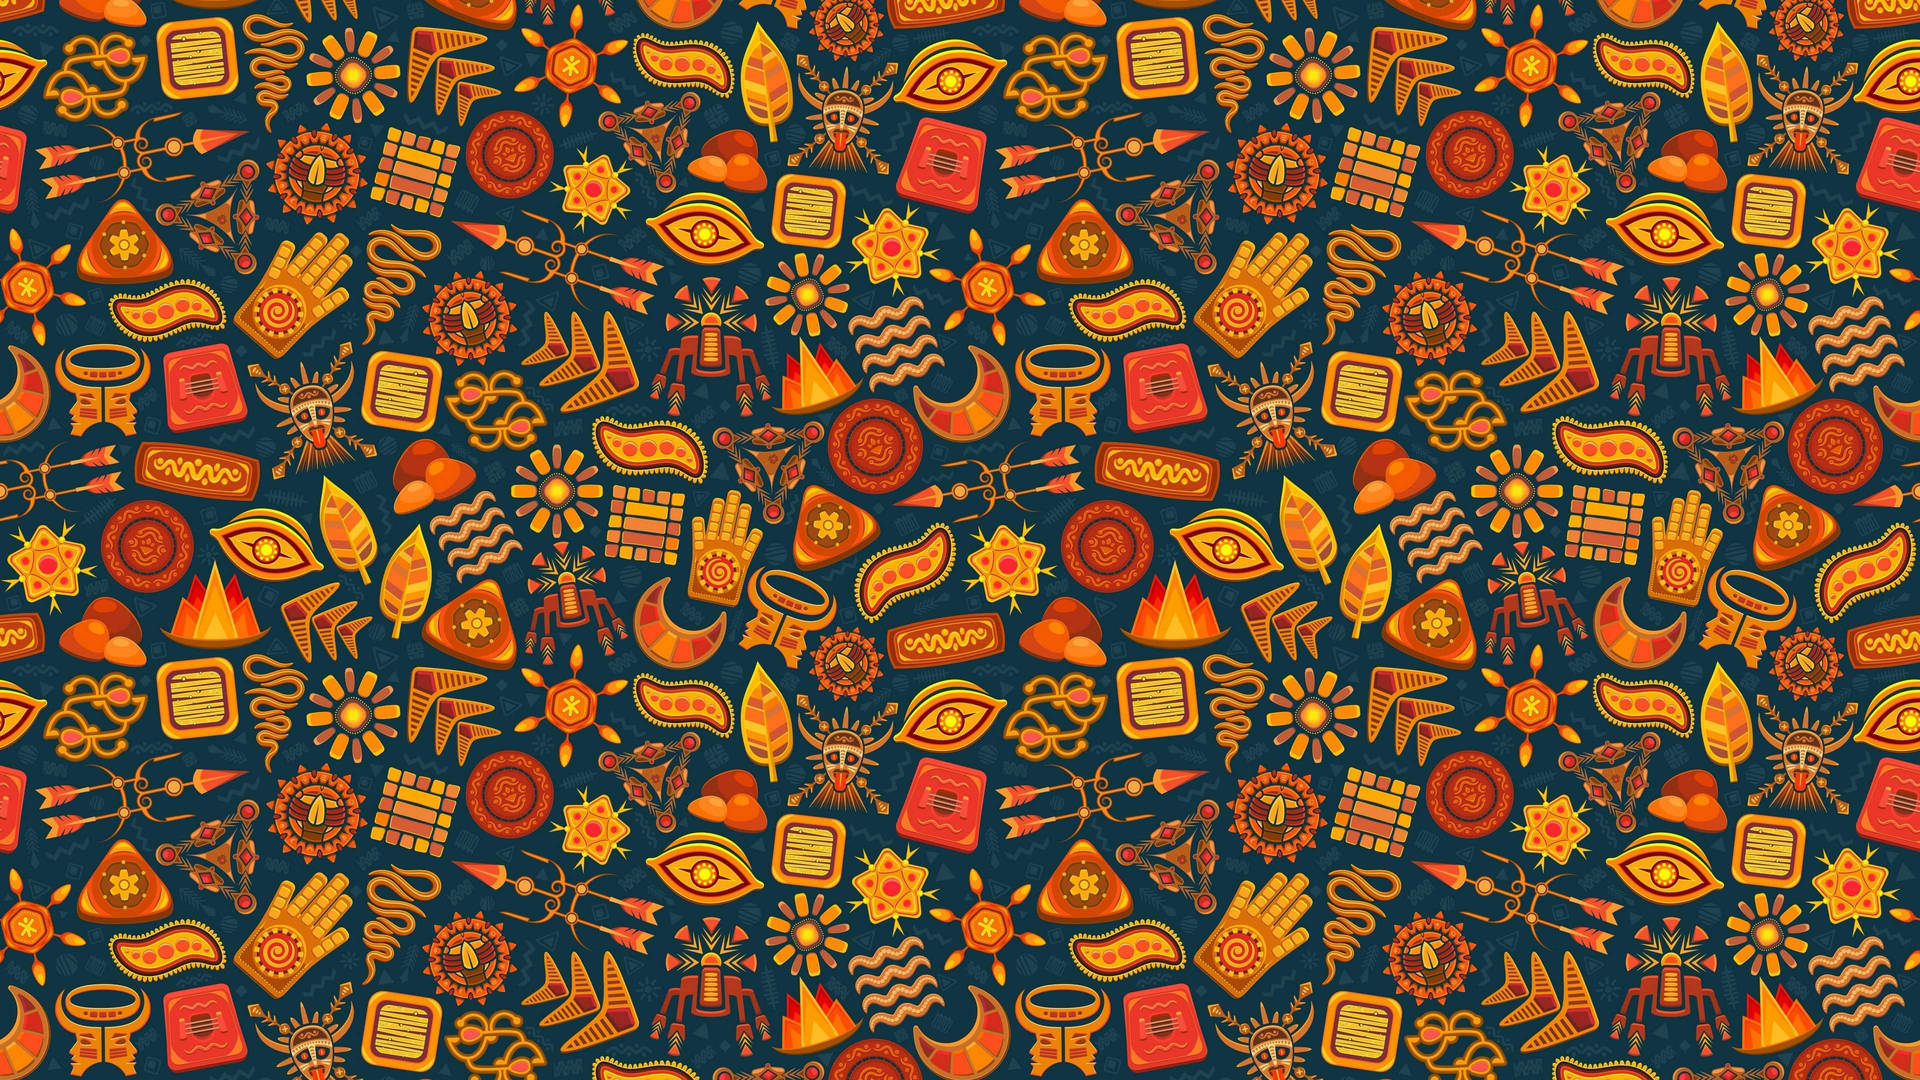 Patterns of Aztec icons design wallpaper